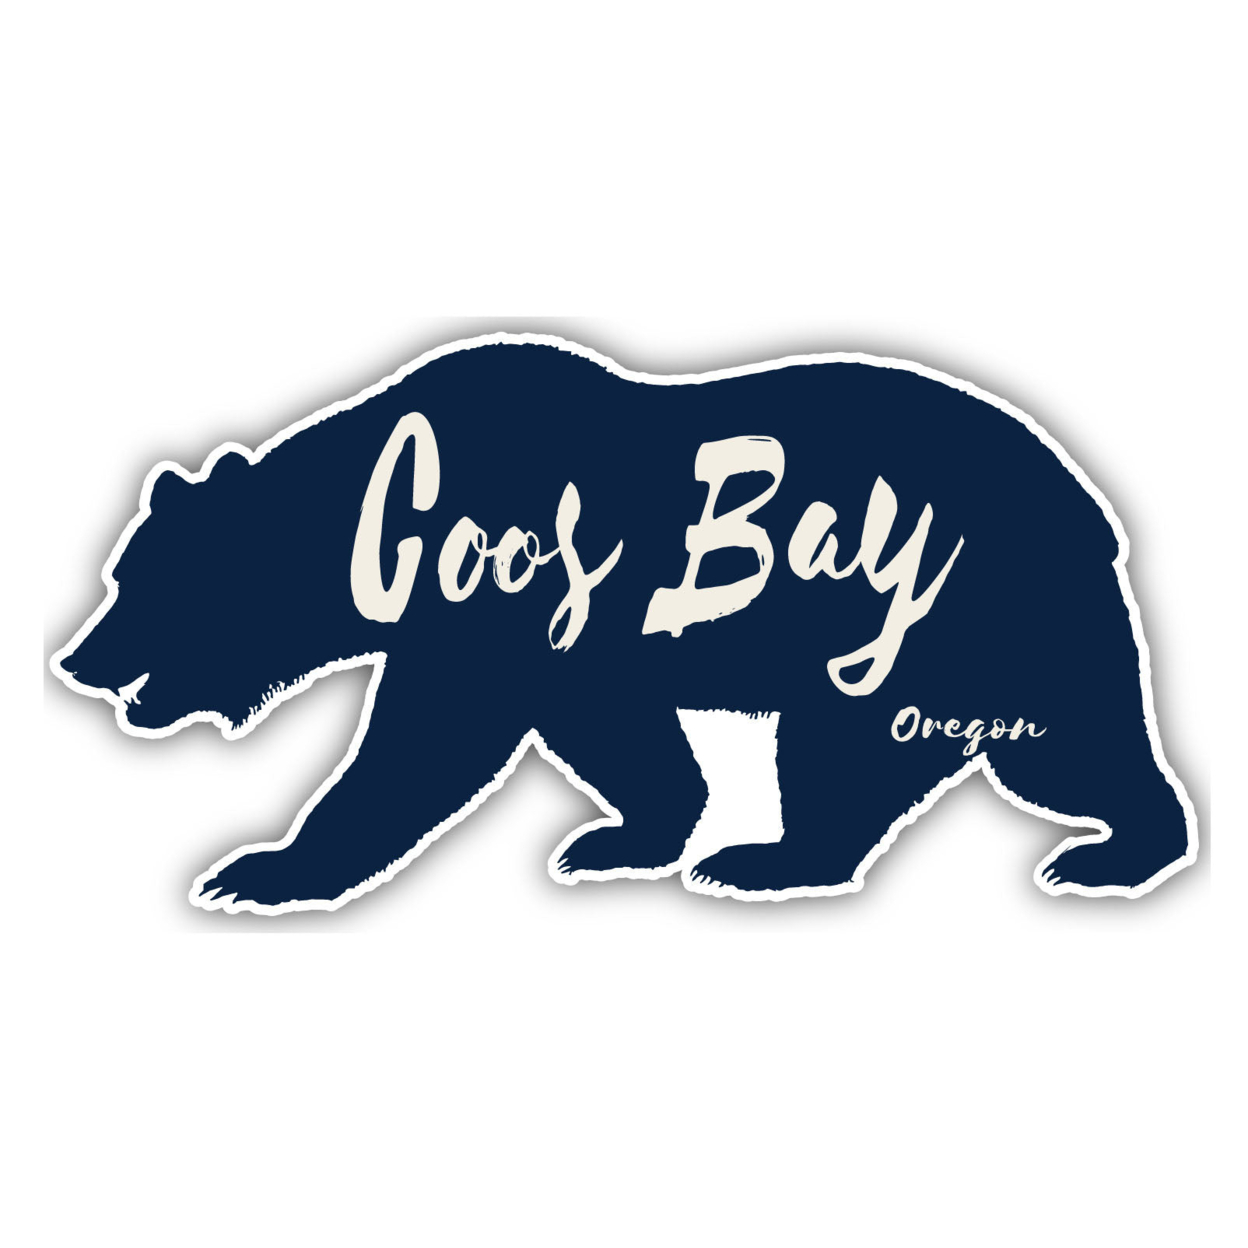 Coos Bay Oregon Souvenir Decorative Stickers (Choose Theme And Size) - 4-Pack, 2-Inch, Bear